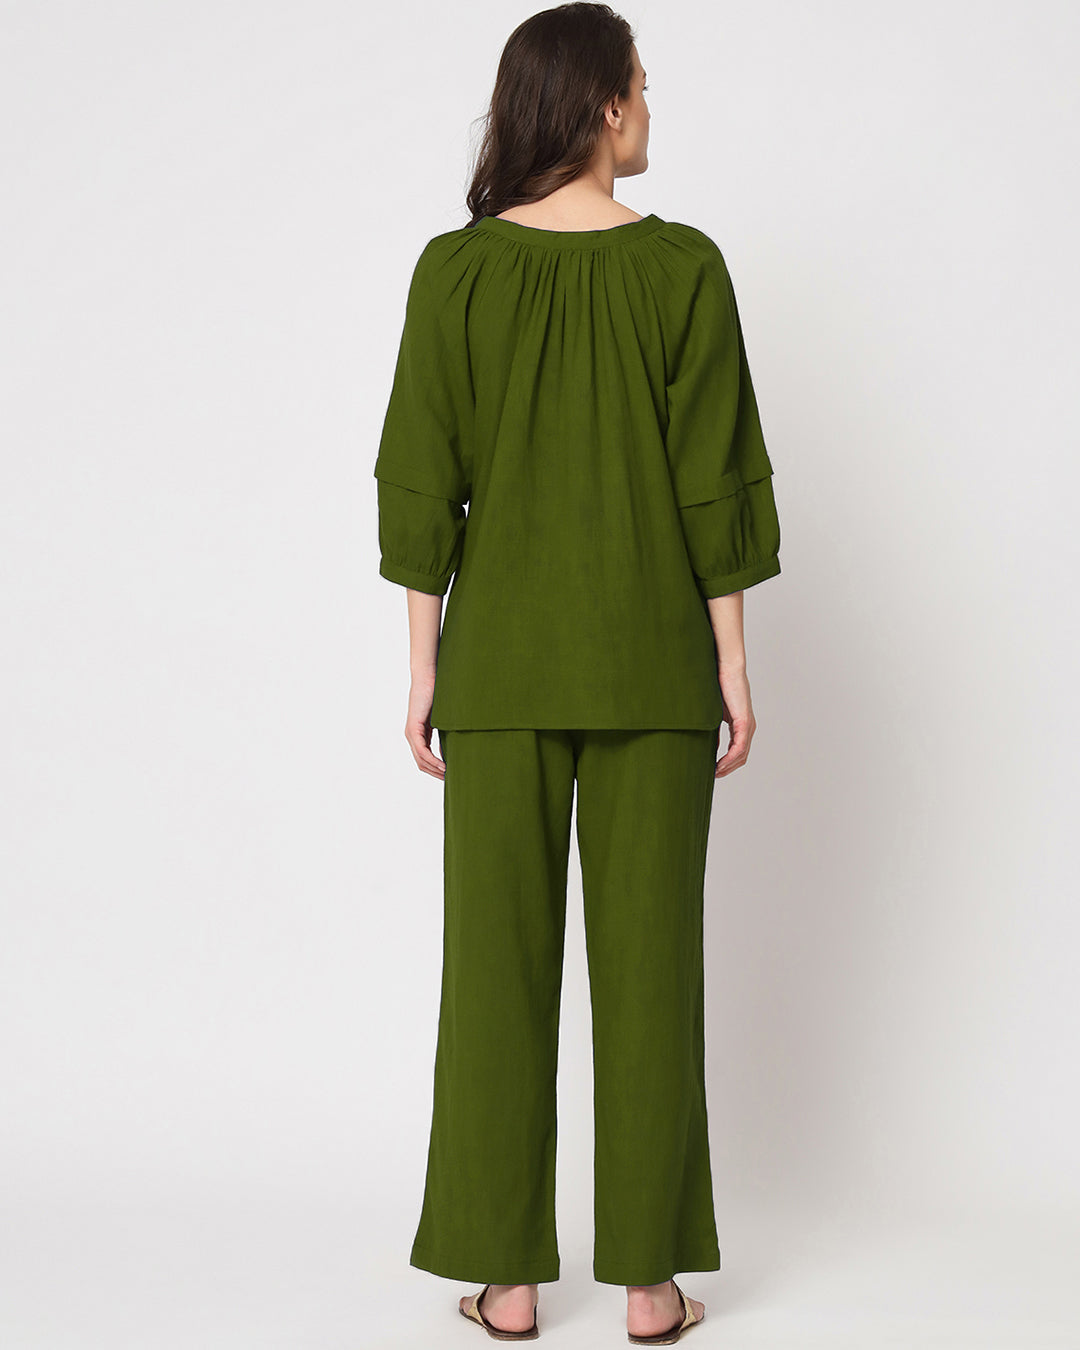 Greening Spring Button Neck Solid Top (Without Bottoms)